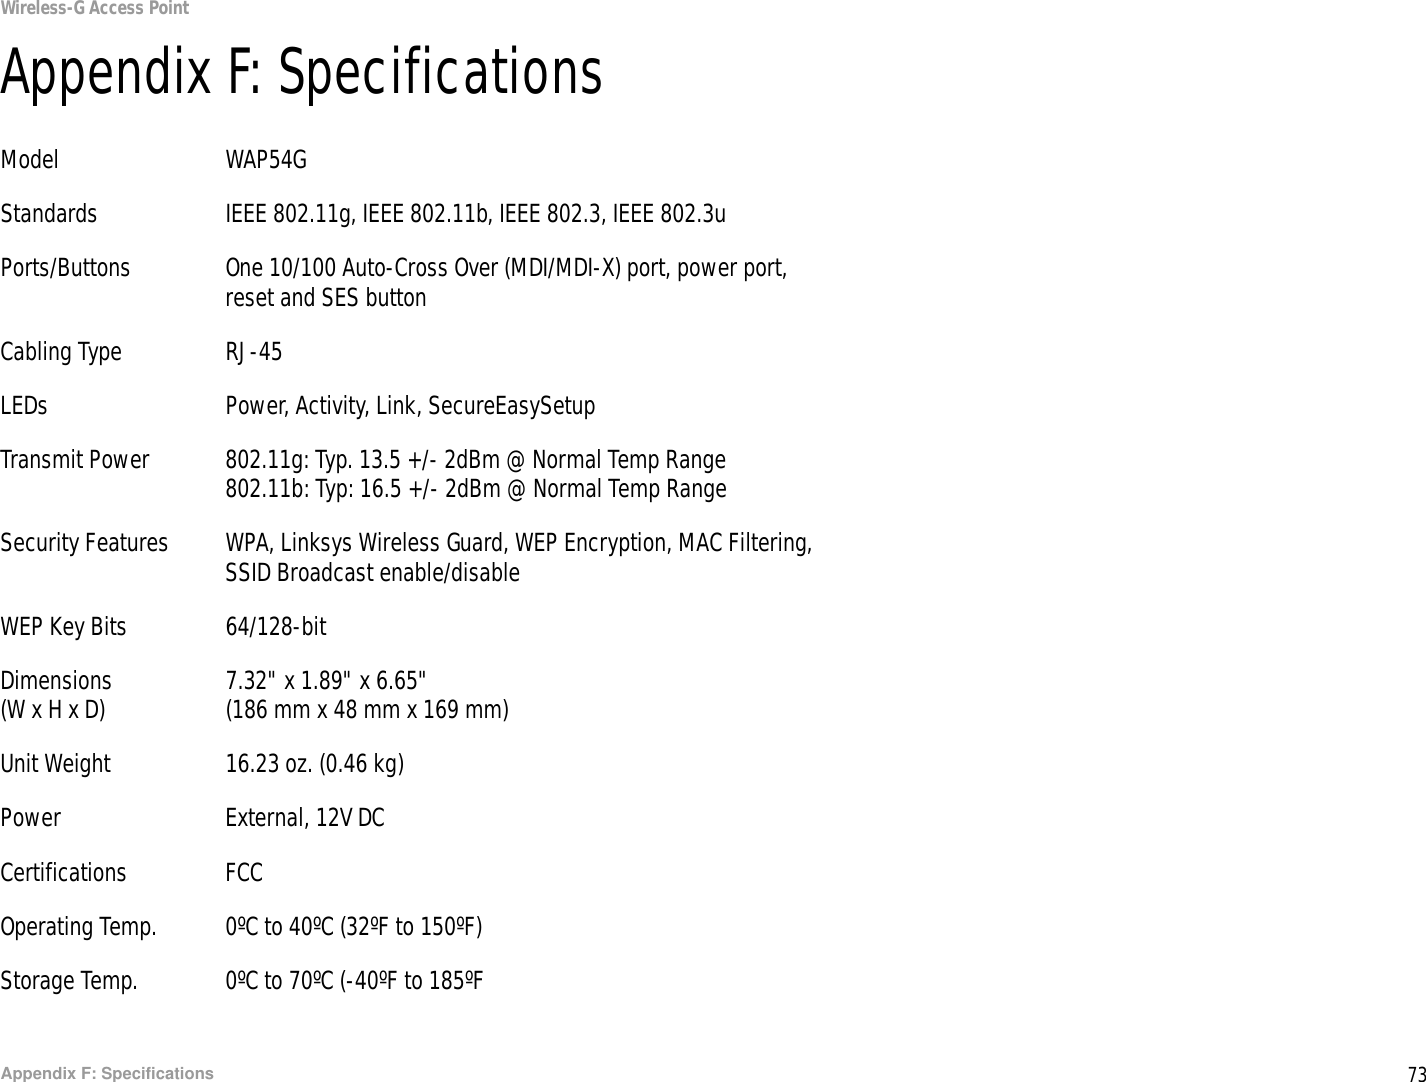 73Appendix F: SpecificationsWireless-G Access PointAppendix F: SpecificationsModel WAP54GStandards IEEE 802.11g, IEEE 802.11b, IEEE 802.3, IEEE 802.3uPorts/Buttons One 10/100 Auto-Cross Over (MDI/MDI-X) port, power port, reset and SES buttonCabling Type RJ-45LEDs Power, Activity, Link, SecureEasySetupTransmit Power 802.11g: Typ. 13.5 +/- 2dBm @ Normal Temp Range802.11b: Typ: 16.5 +/- 2dBm @ Normal Temp RangeSecurity Features WPA, Linksys Wireless Guard, WEP Encryption, MAC Filtering, SSID Broadcast enable/disableWEP Key Bits 64/128-bitDimensions 7.32&quot; x 1.89&quot; x 6.65&quot;(W x H x D) (186 mm x 48 mm x 169 mm)Unit Weight 16.23 oz. (0.46 kg)Power External, 12V DCCertifications FCCOperating Temp. 0ºC to 40ºC (32ºF to 150ºF)Storage Temp. 0ºC to 70ºC (-40ºF to 185ºF